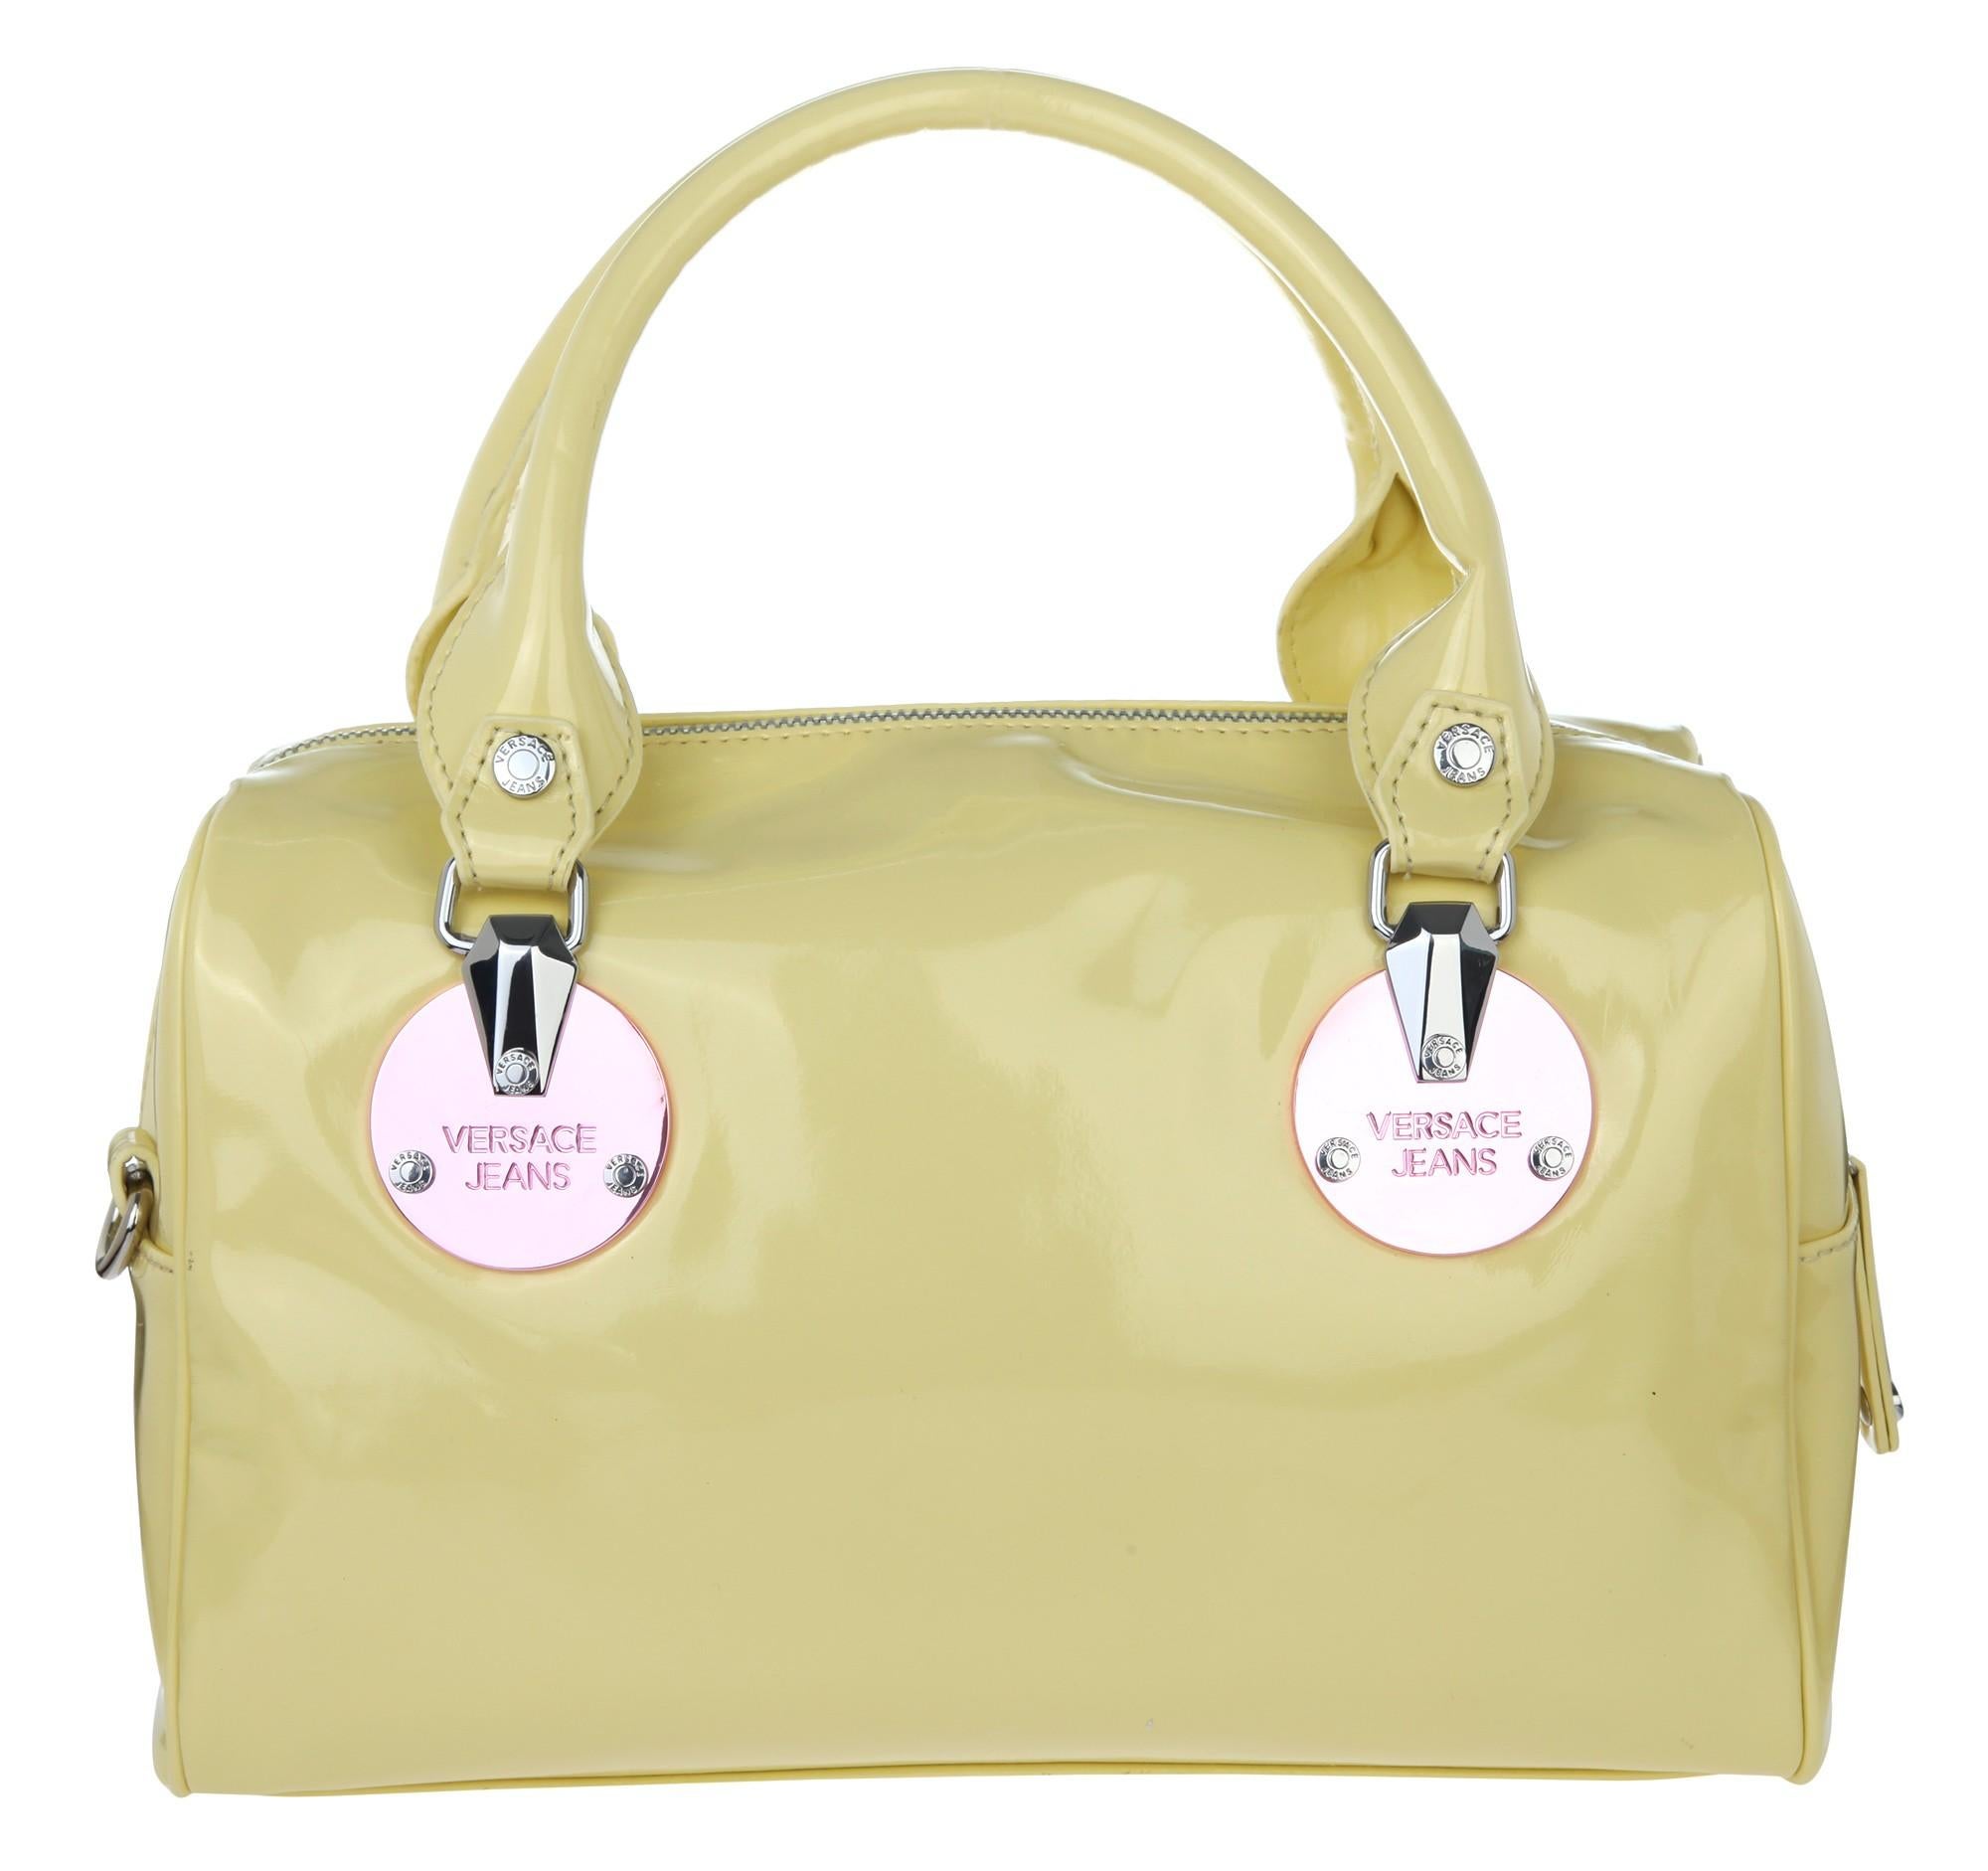 Item number: E1VFBBH1-YE
Compartments: 1 main compartment, 1 zipper pocket, 2 slip pockets
Color: yellow
Exterior: 100% polyurethane
Lining: 100% polyester
Closure: zipper
Product Dimensions width 31 cm, height 23 cm, depth 13 cm
Adjustable